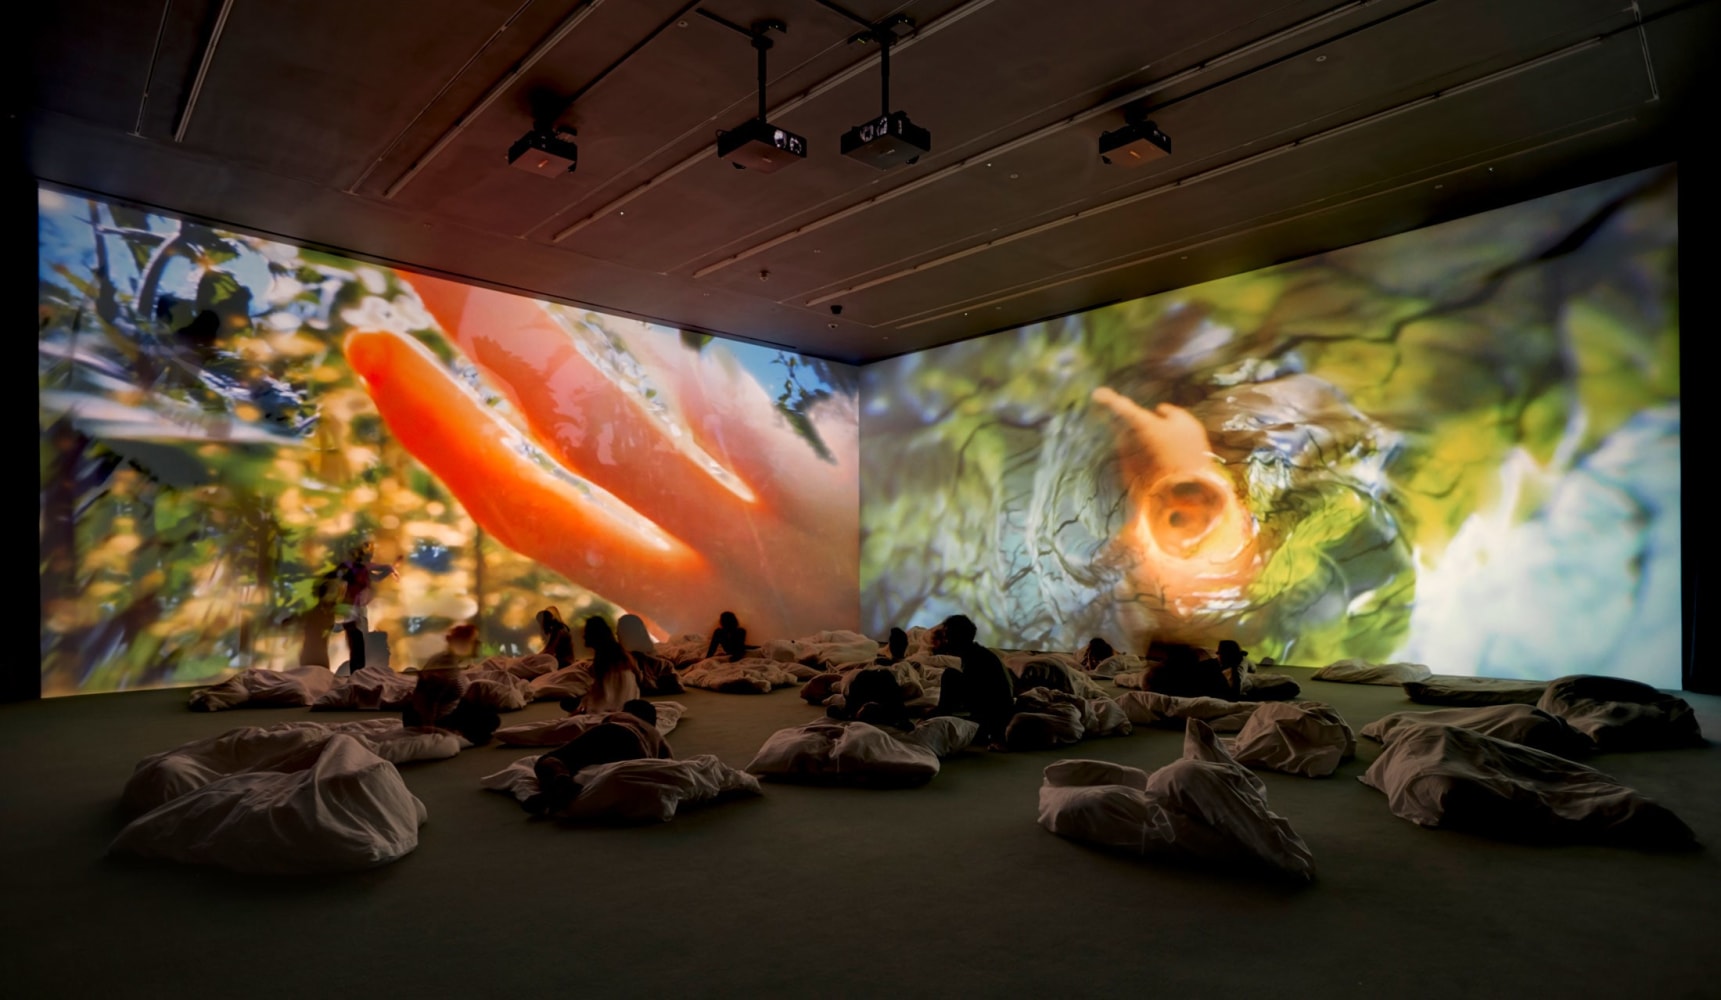 Pipilotti Rist
Worry Will Vanish Horizon (from the Worry Work Family), 2014
Two-channel video and sound installation, color, with carpet and white duvets
Duration: 10 minutes, 25 seconds
Dimensions variable